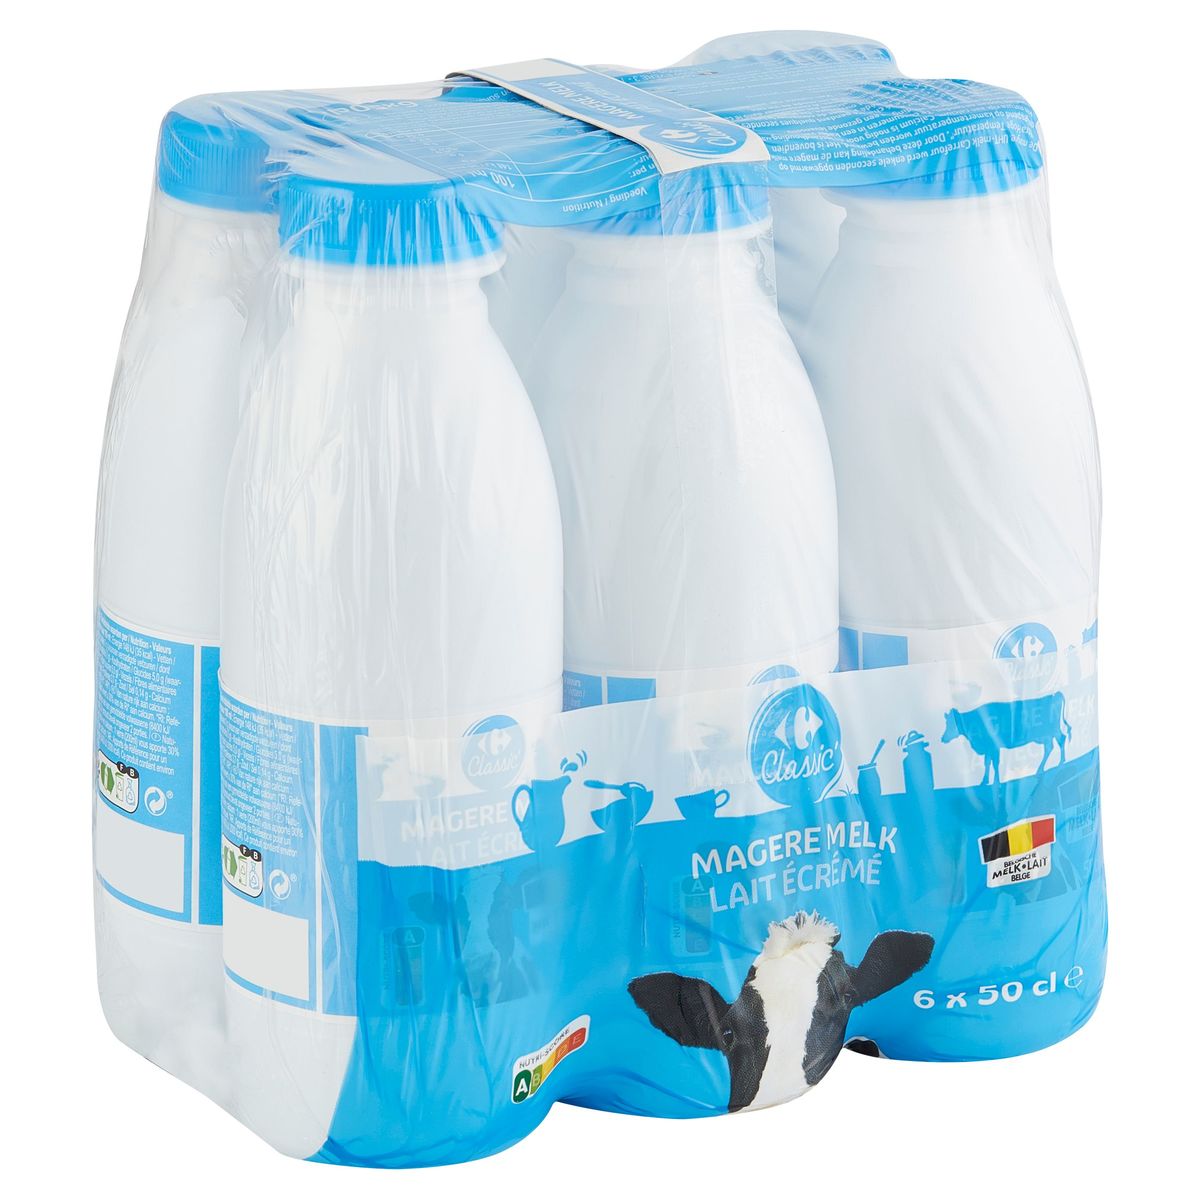 Carrefour Classic' Magere Melk 6 x 50 cl